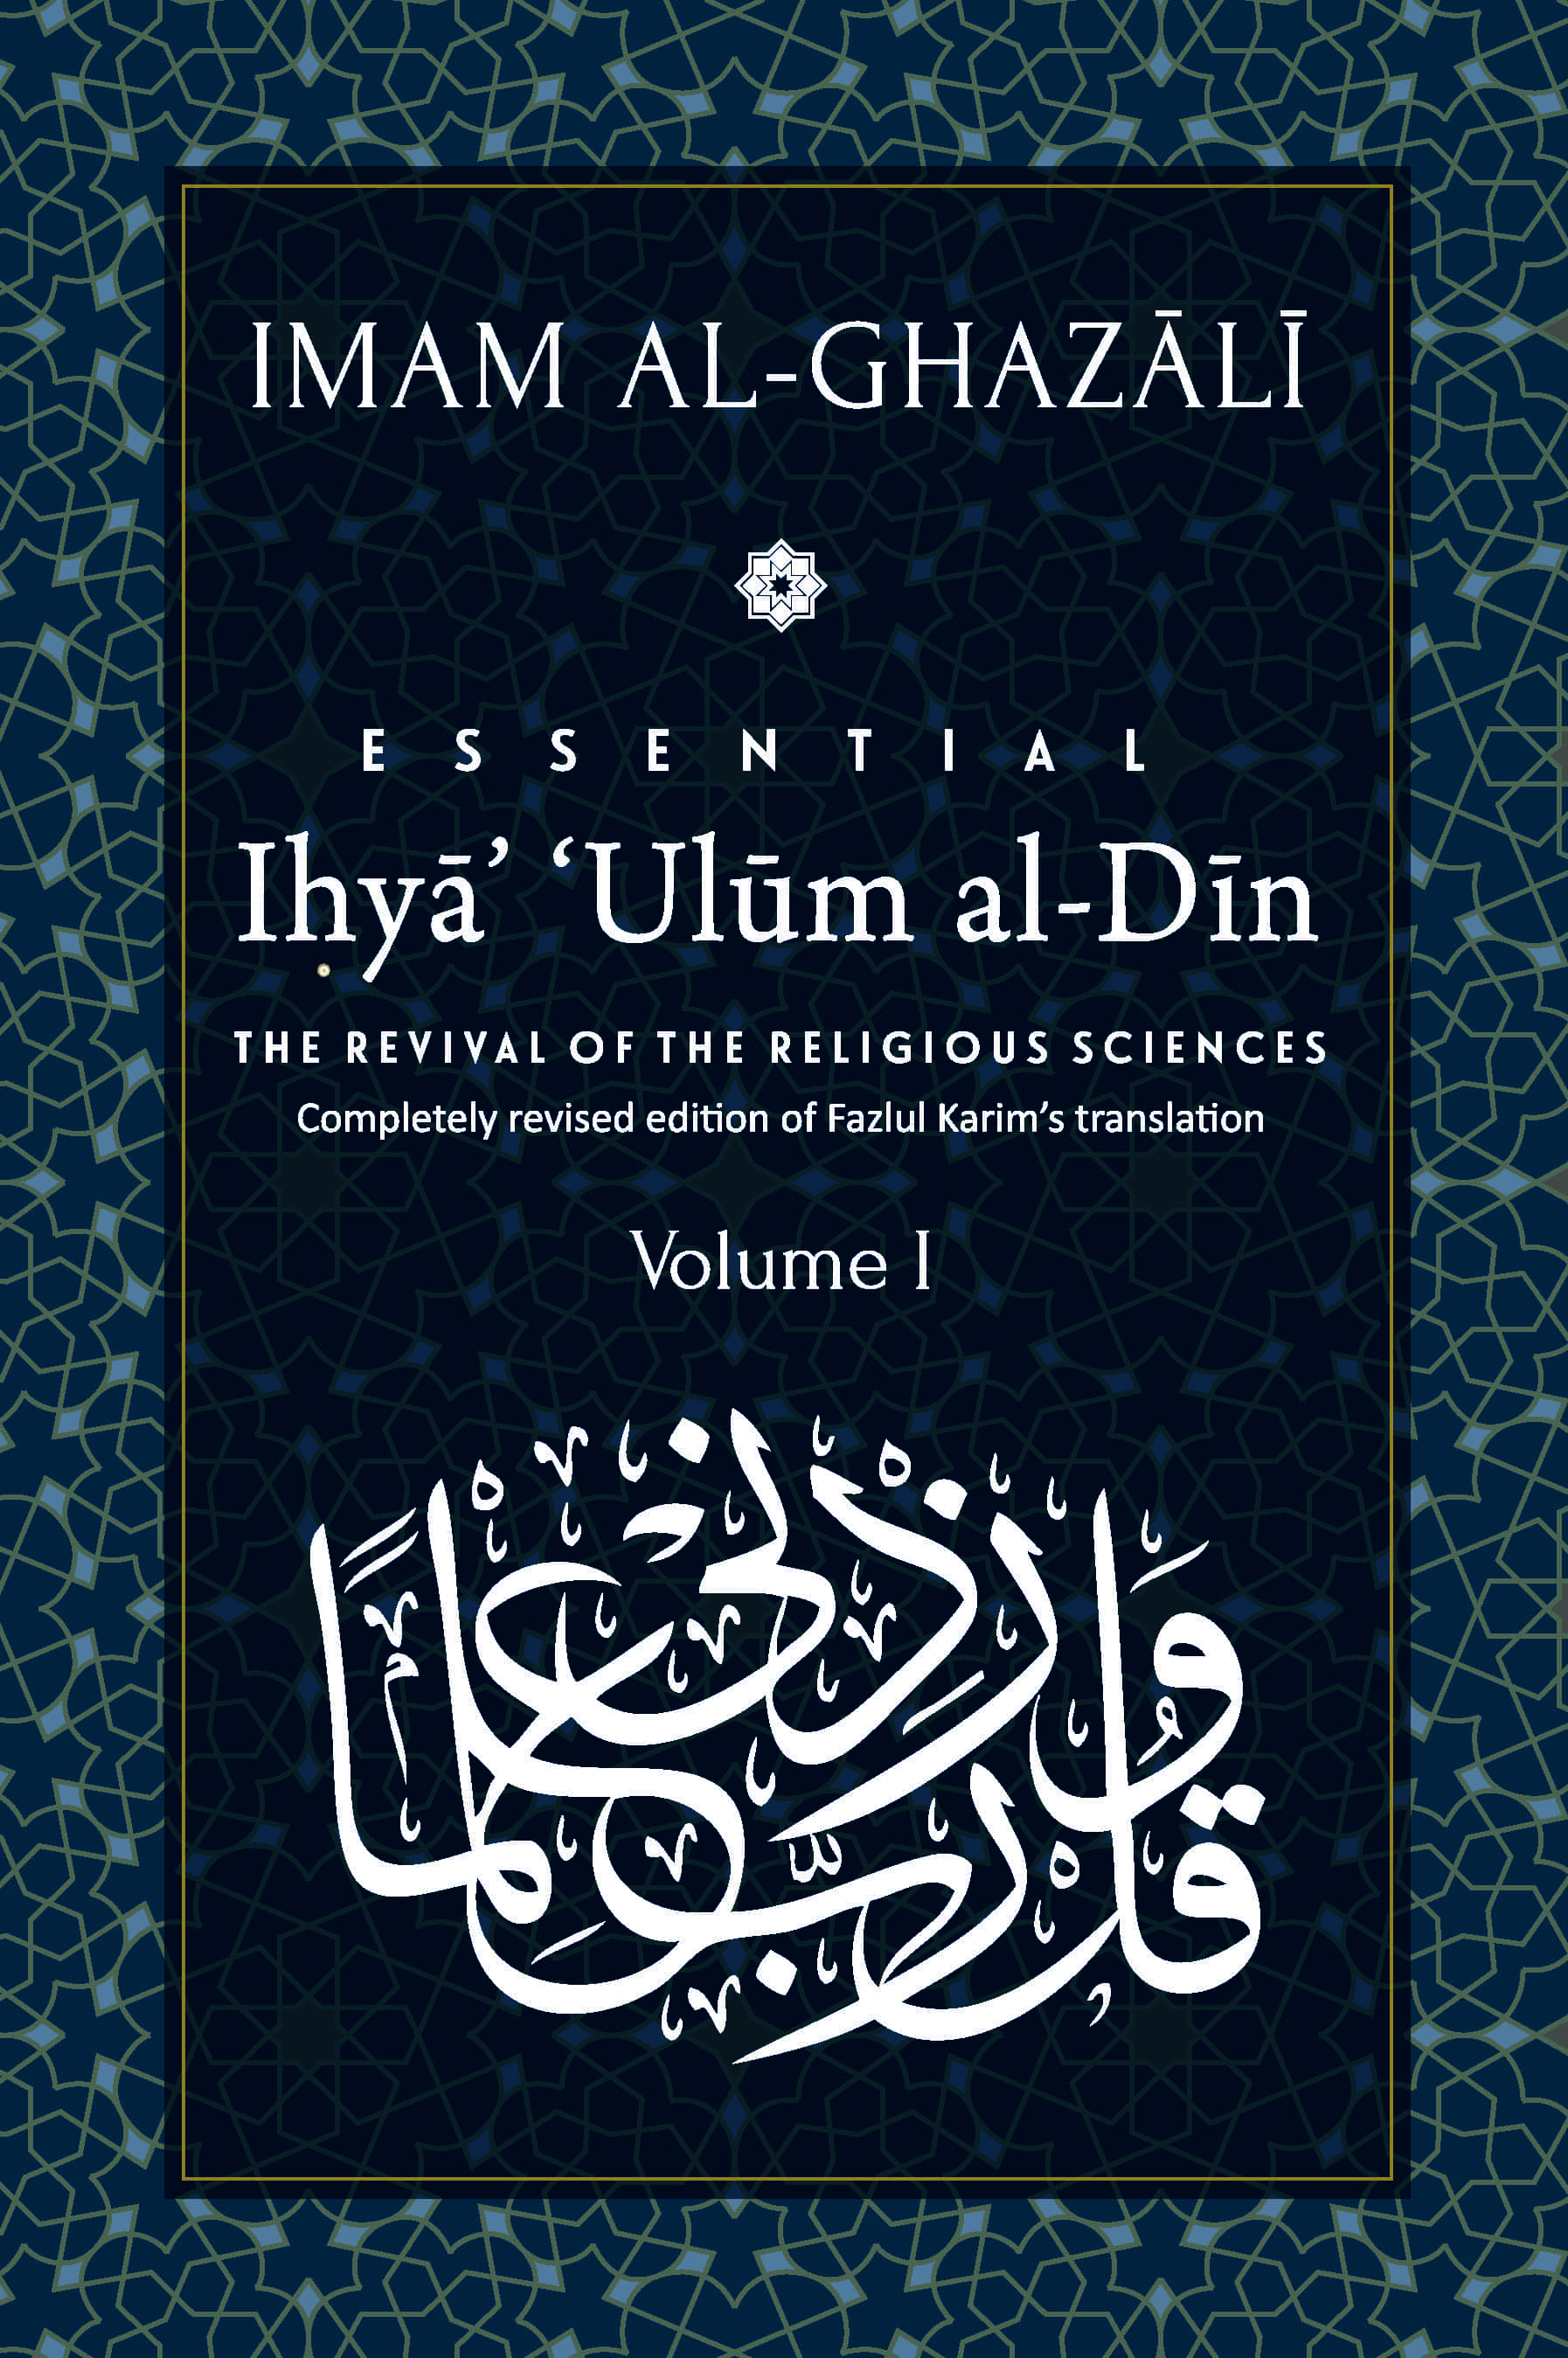 Ihya' 'Ulum al-Din: [Volume 1] The Revival of the Religious Sciences